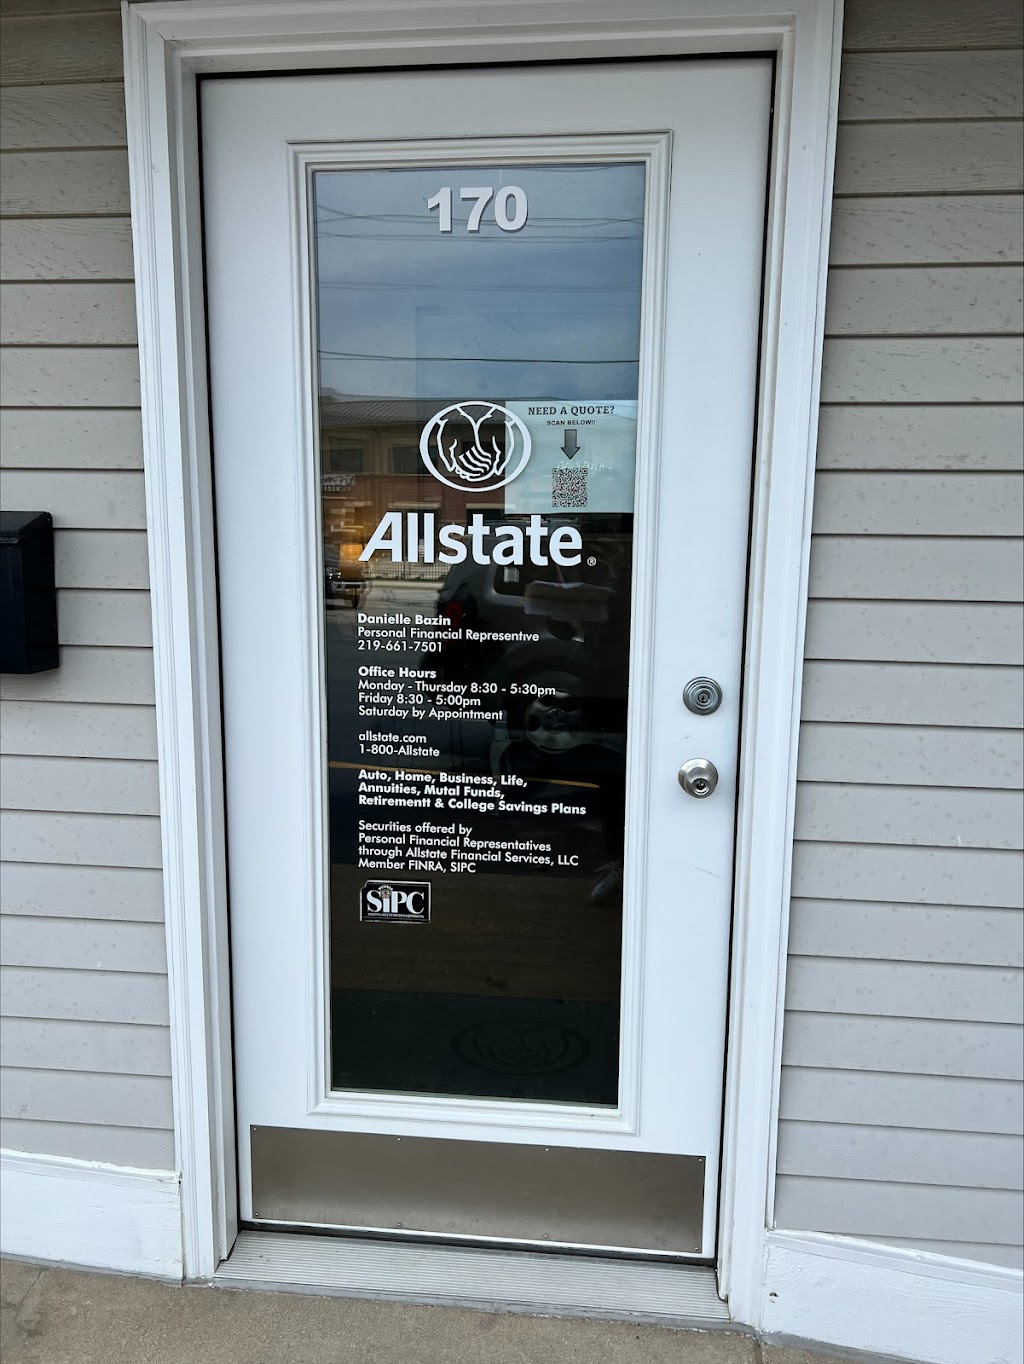 Danielle Bazin: Allstate Insurance | 170 S West St, Crown Point, IN 46307, USA | Phone: (219) 661-7501